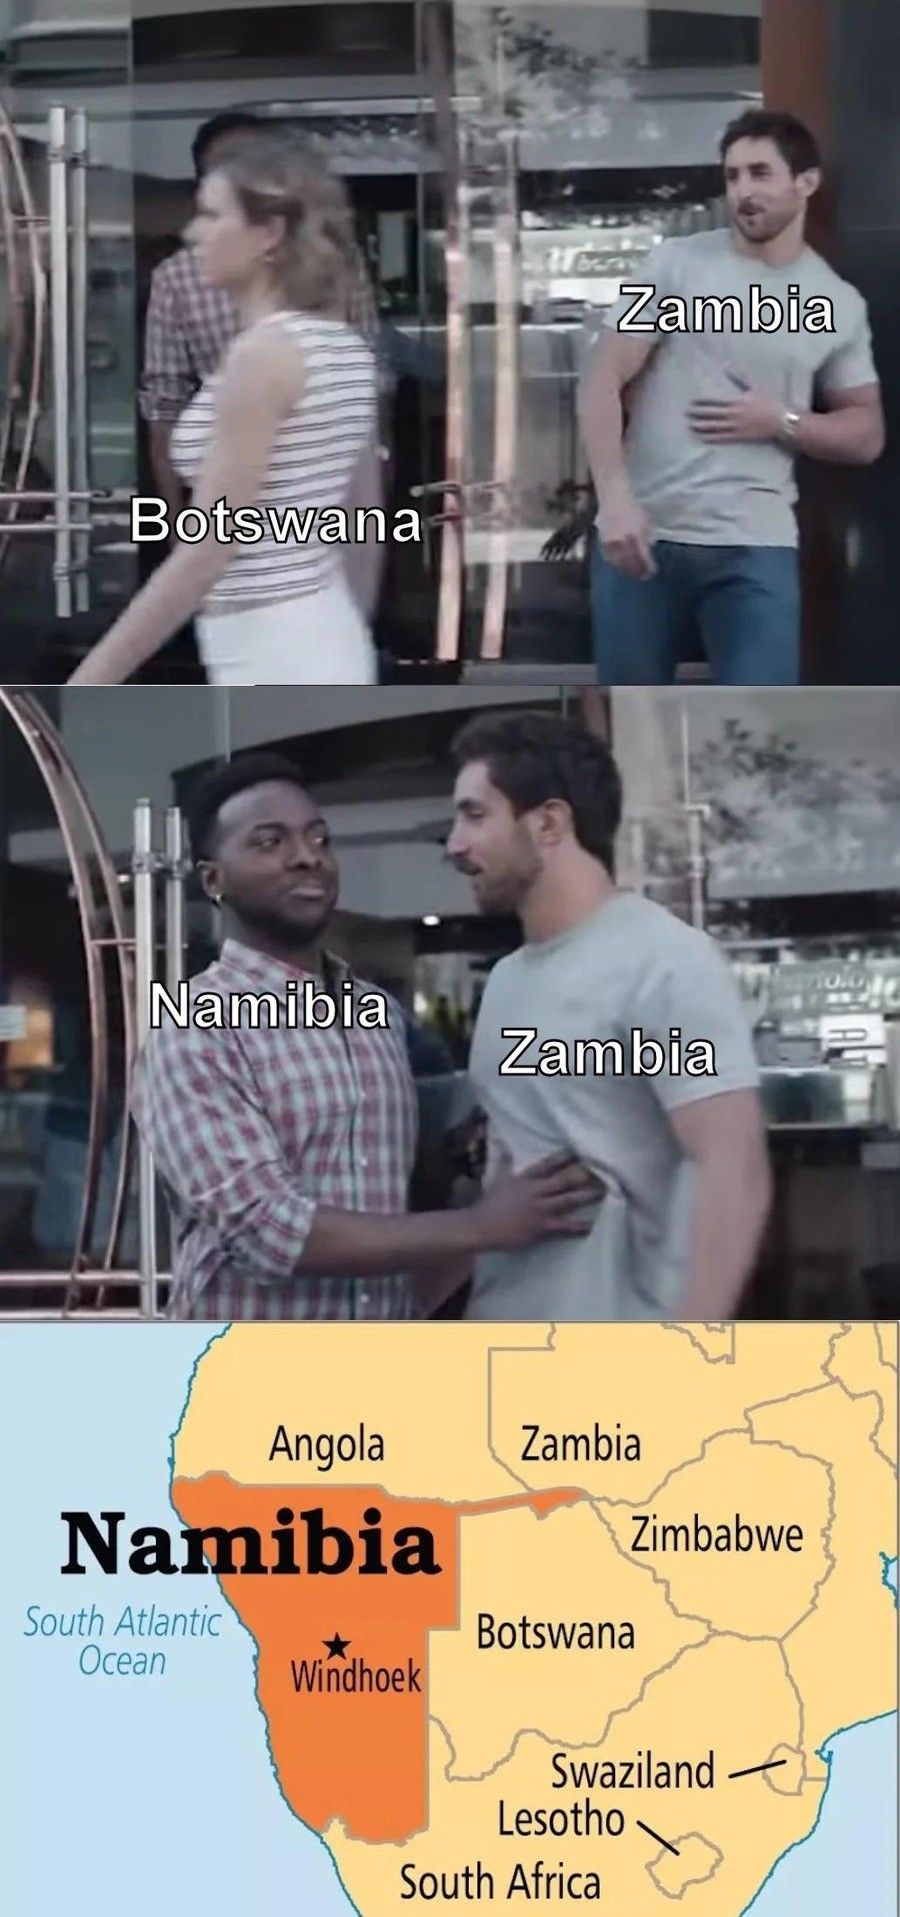 If you don't social distance, Namibia will for you